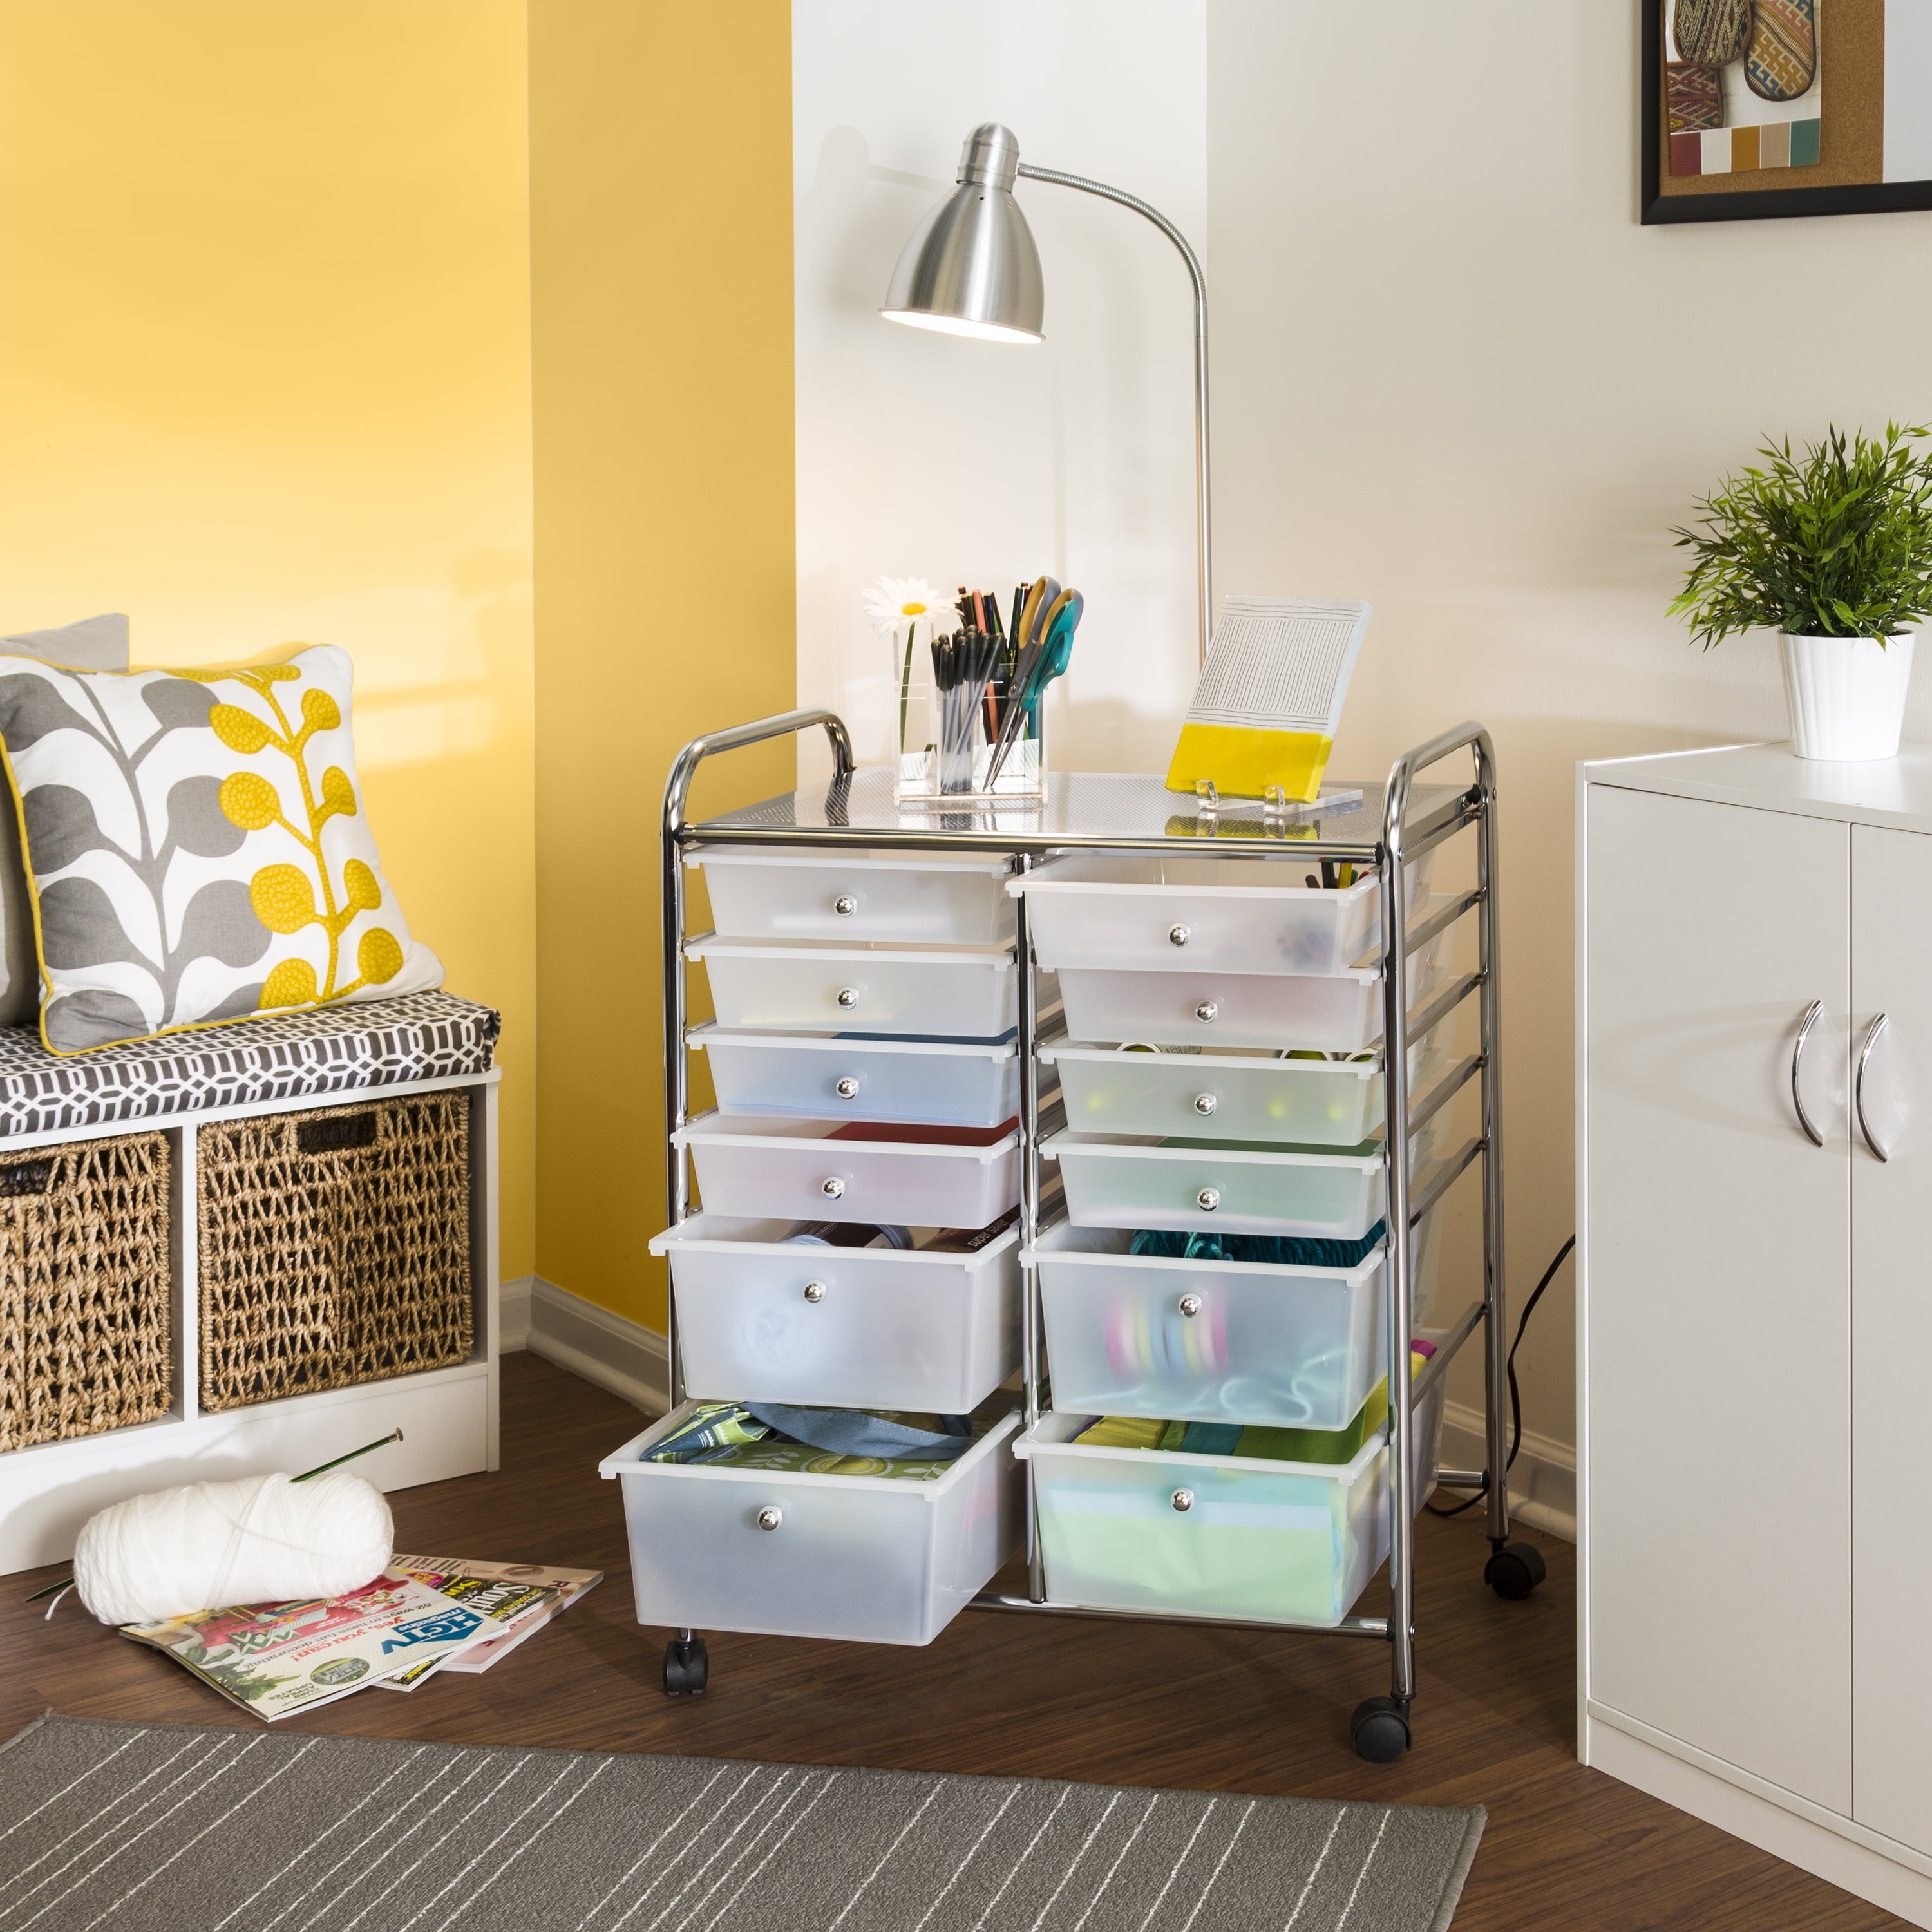 Chrome/Clear 3-Drawer Rolling Organizer Cart